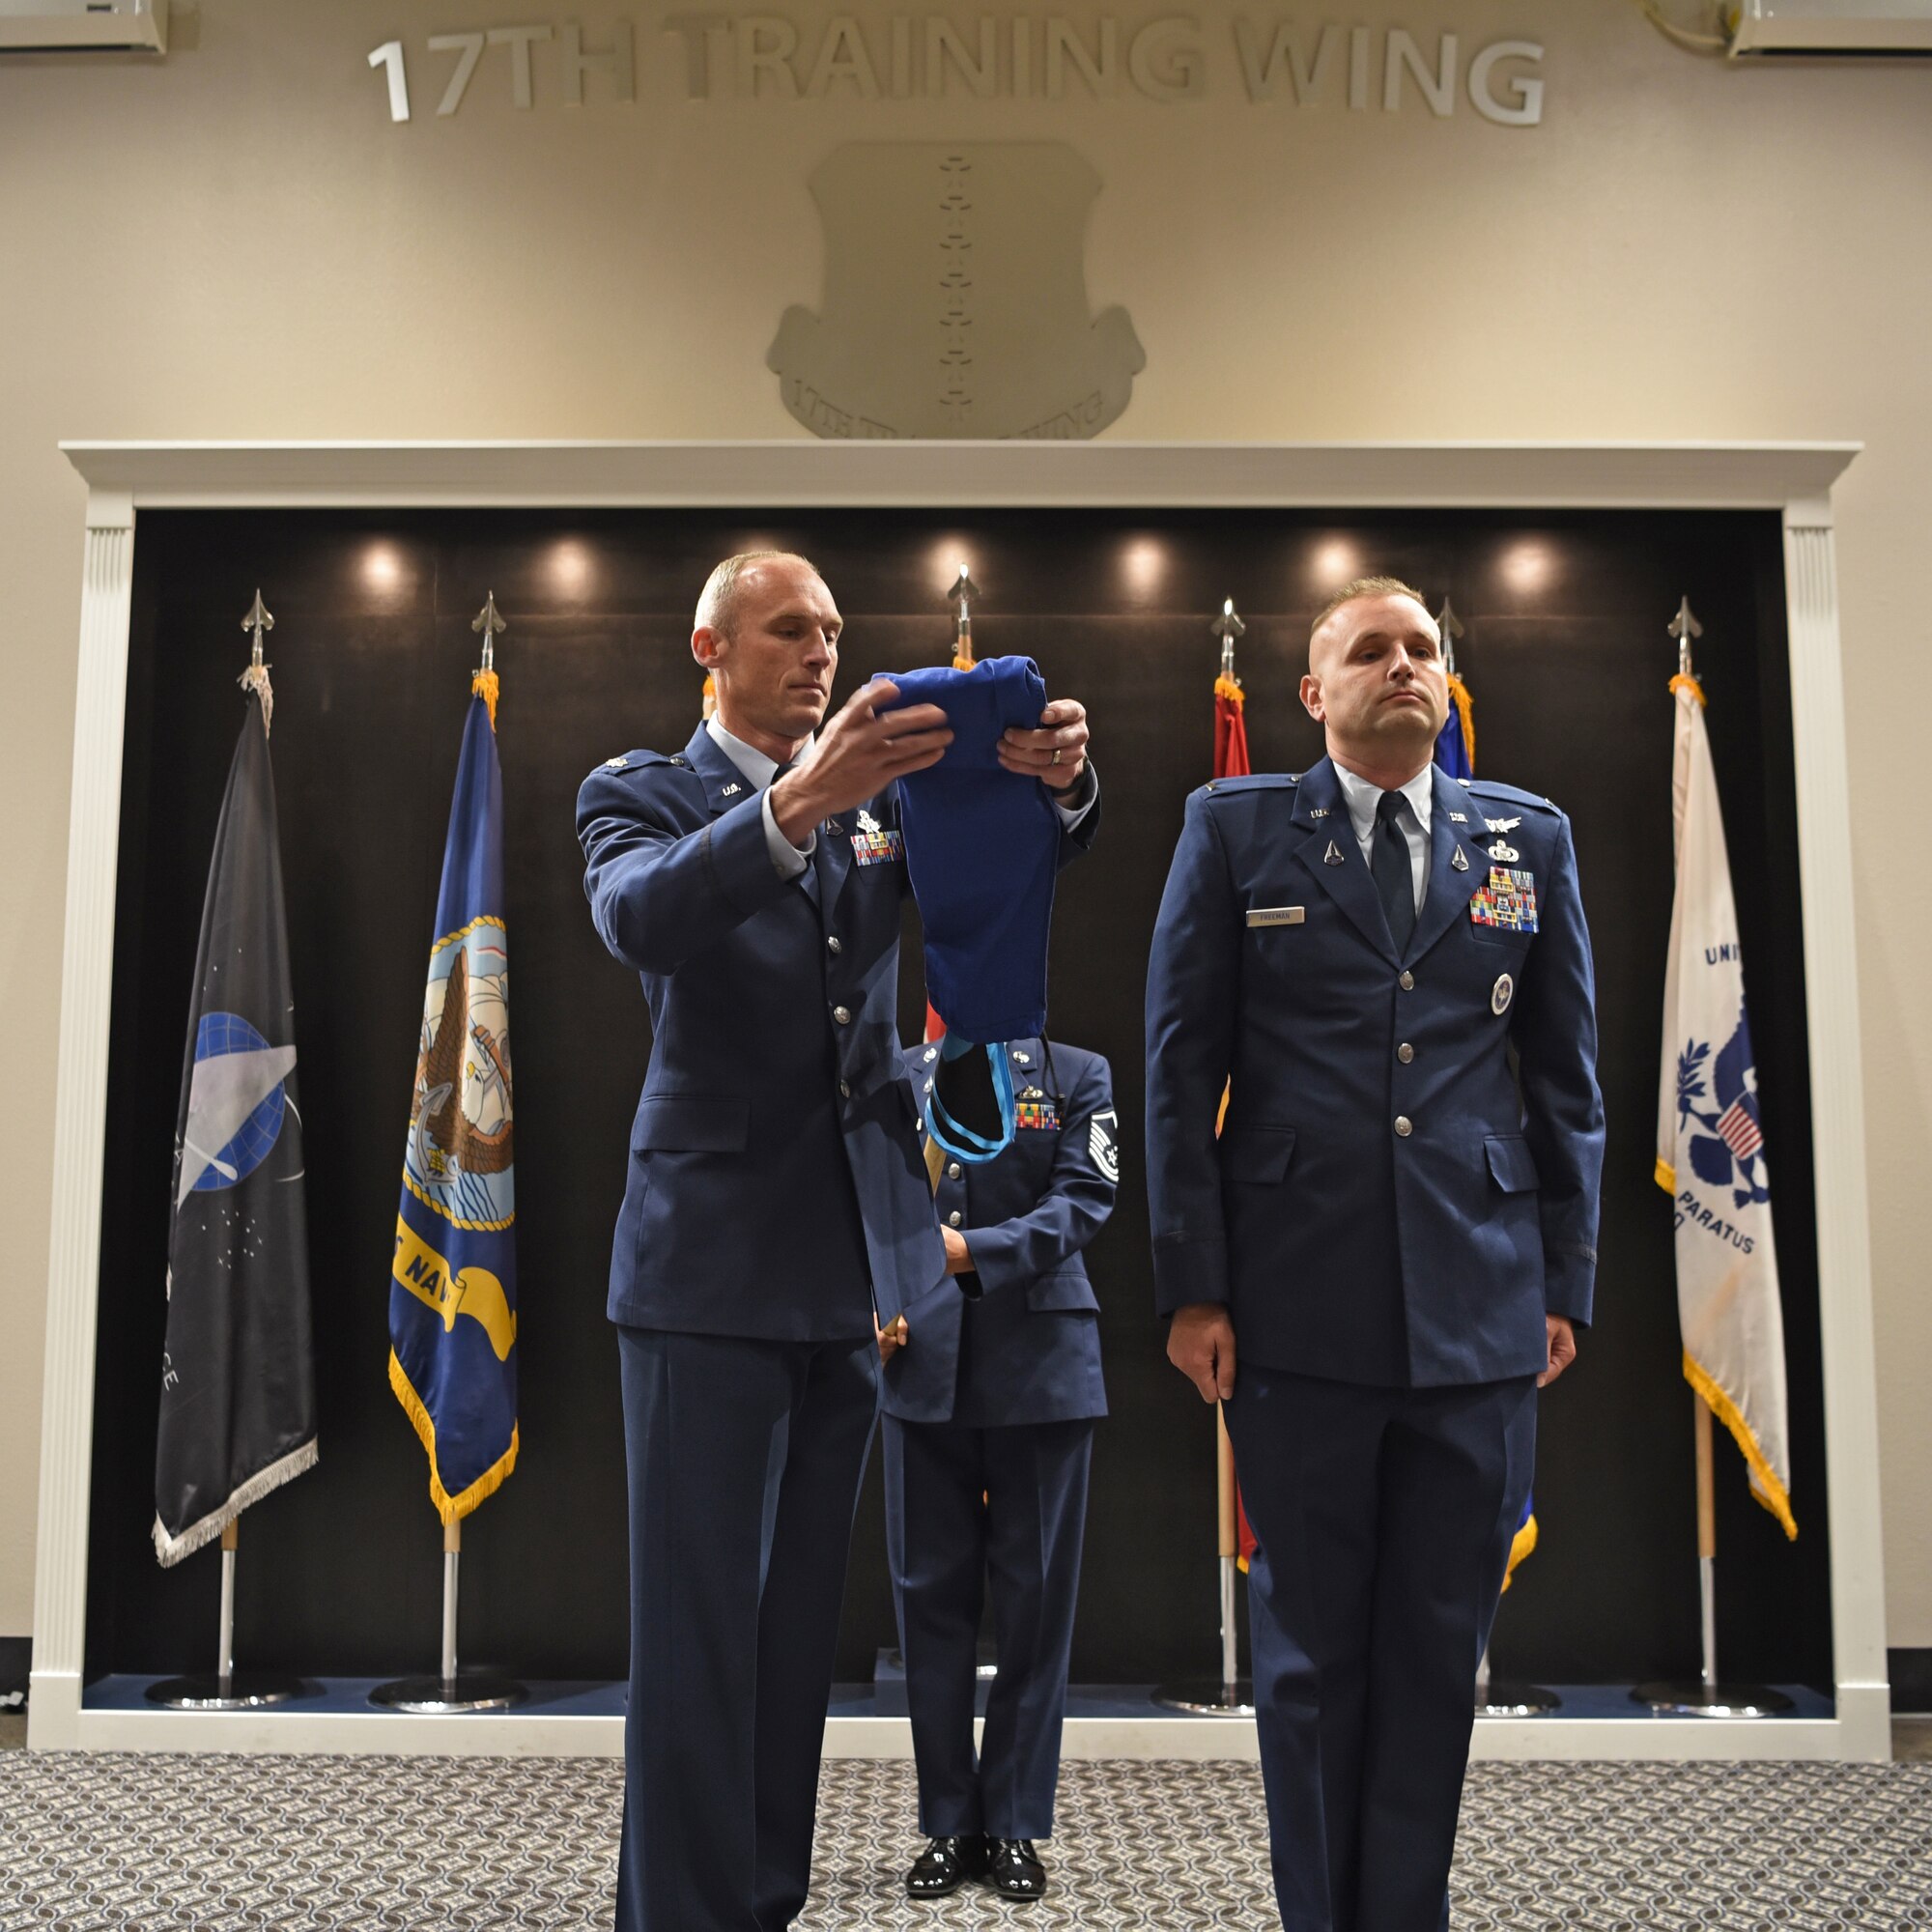 U.S. Space Force Lt. Col. Charles Cooper, 533rd Training Squadron commander, uncases the 533rd TRS guidon during the activation and assumption of responsibility for 533rd TRS, Detachment 1, at the Powell Event Center, Goodfellow Air Force Base, Texas, June 21, 2022. Uncasing the guidon marked the history and lineage beginning for the 533rd TRS, Det 1 on Goodfellow AFB. (U.S. Air Force photo by Senior Airman Abbey Rieves)